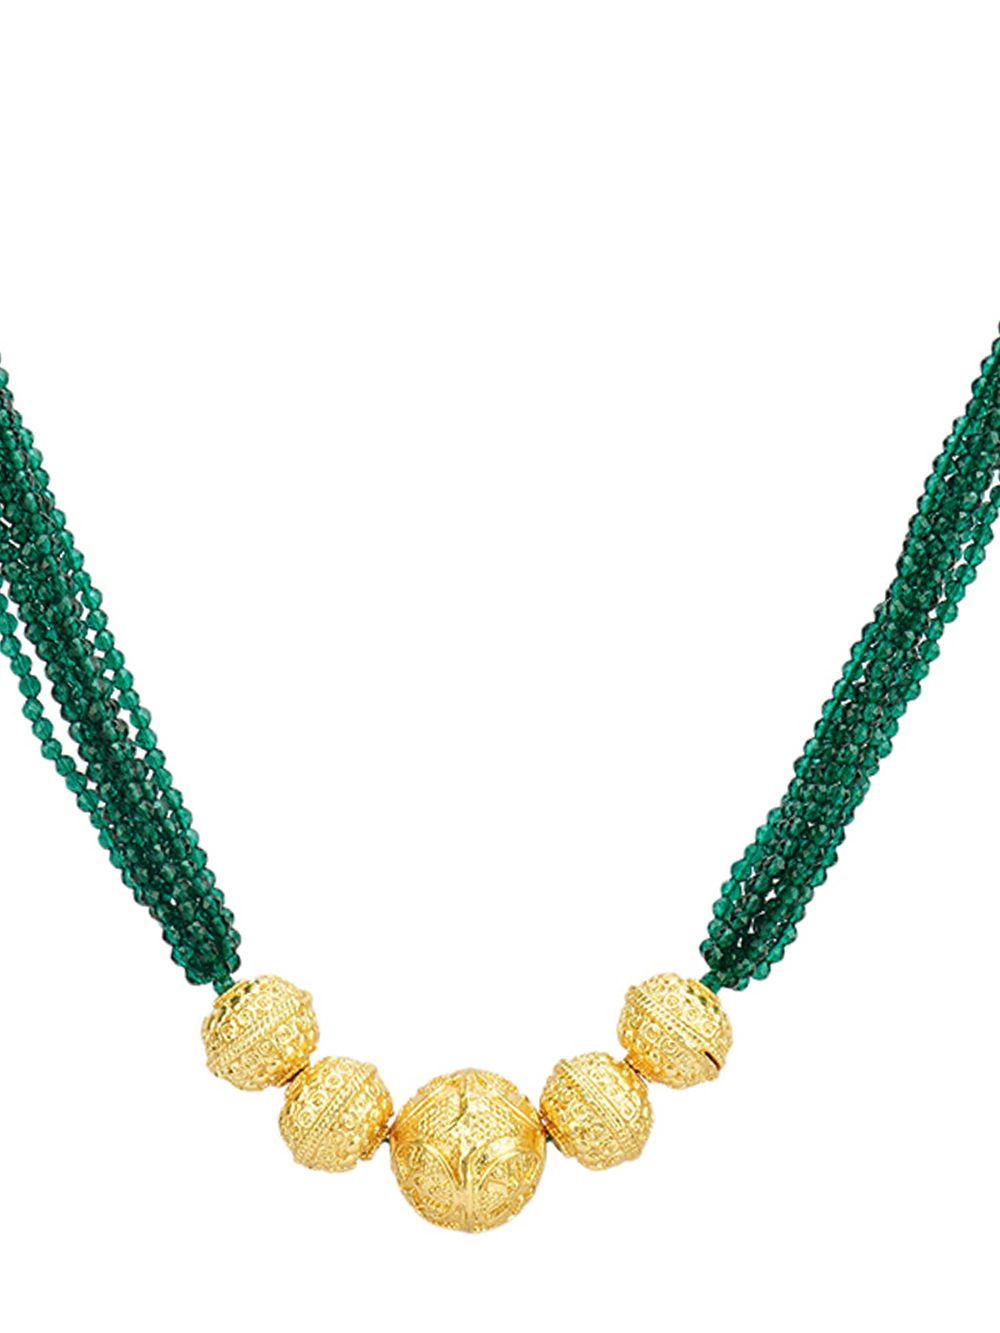 Green Handcrafted  Beaded Necklace